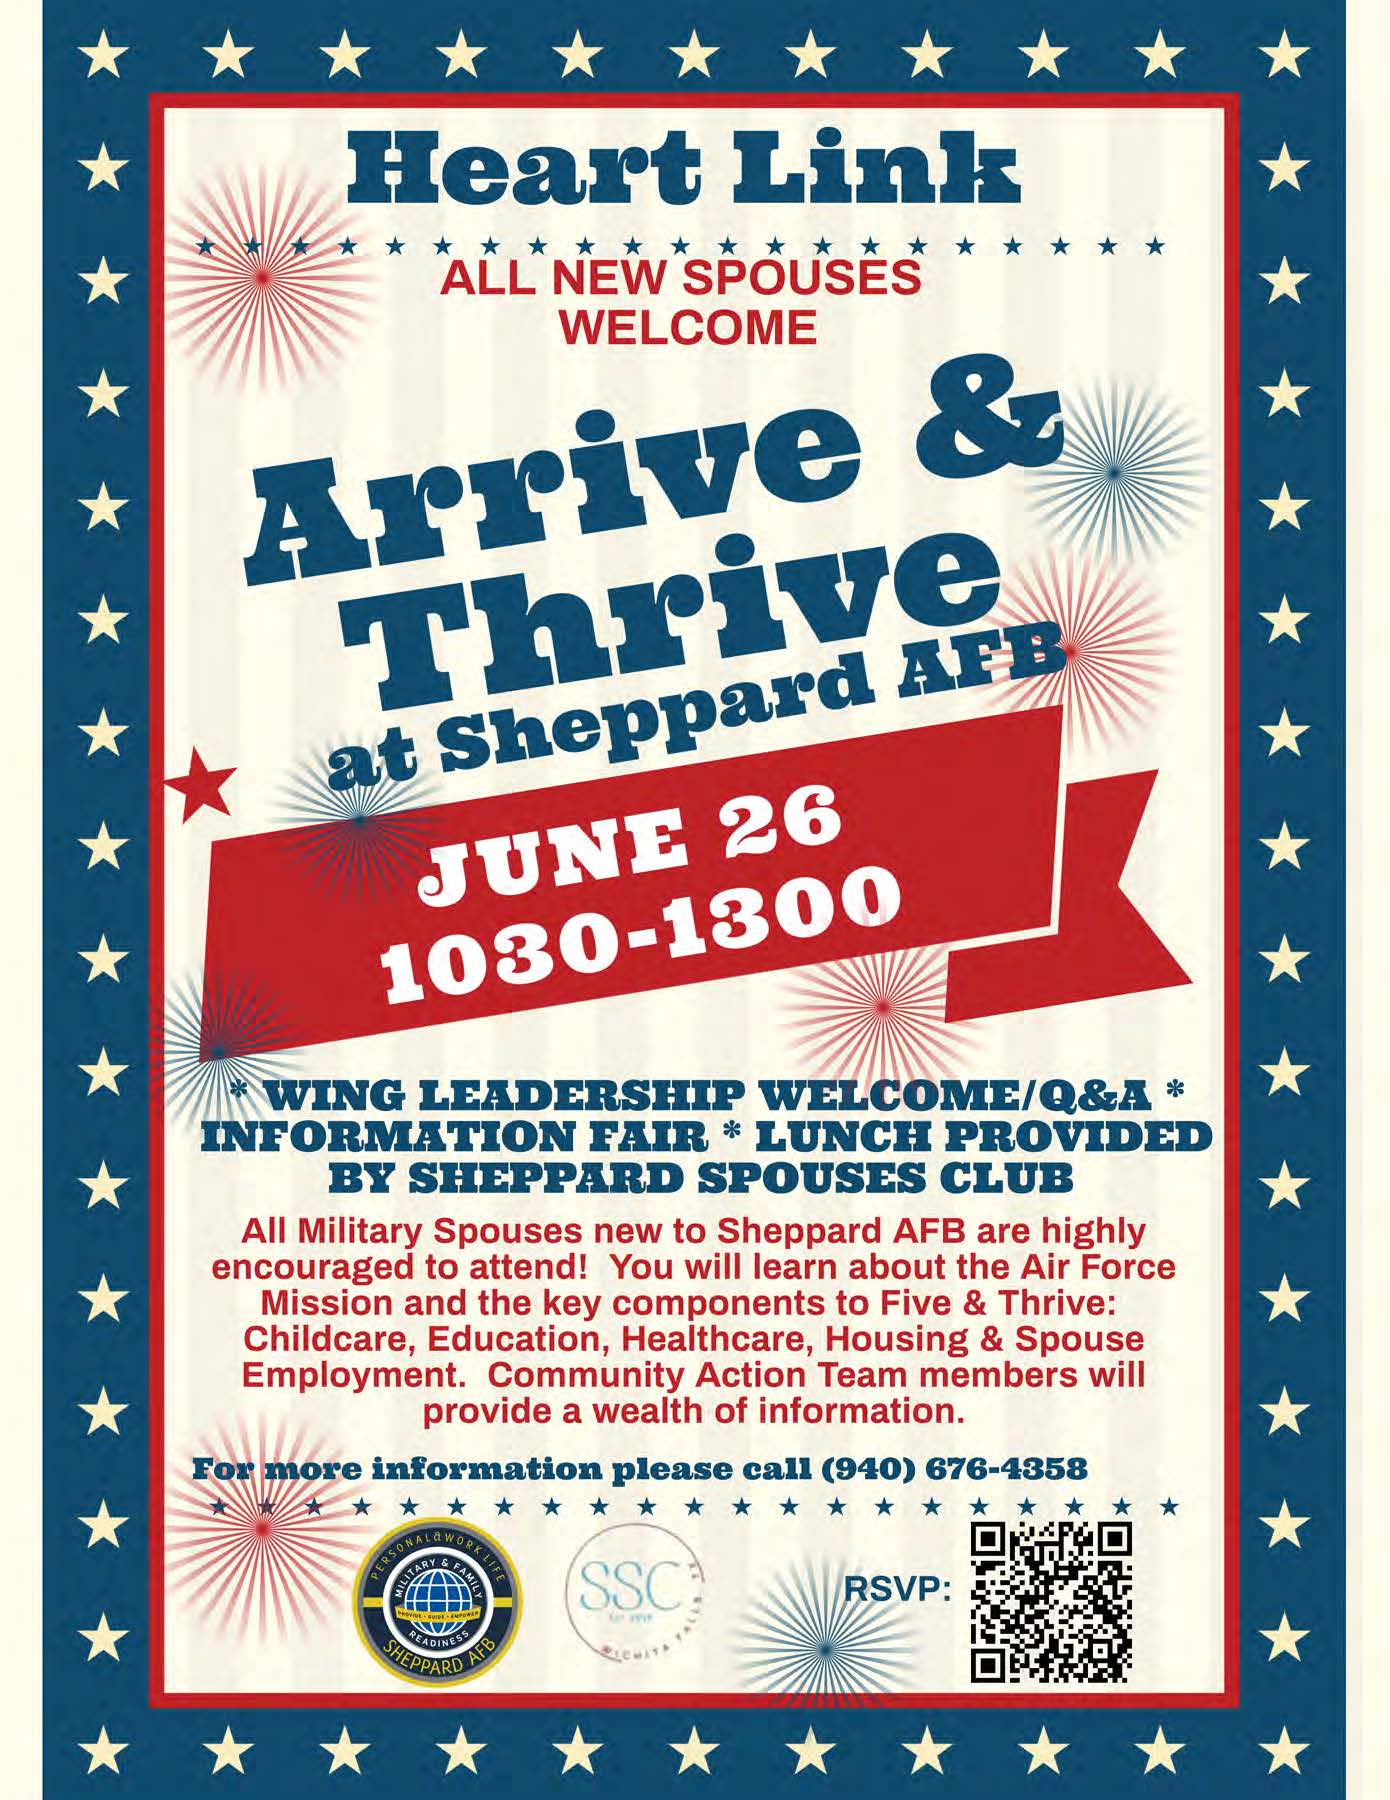 Arrive & Thrive at Sheppard AFB